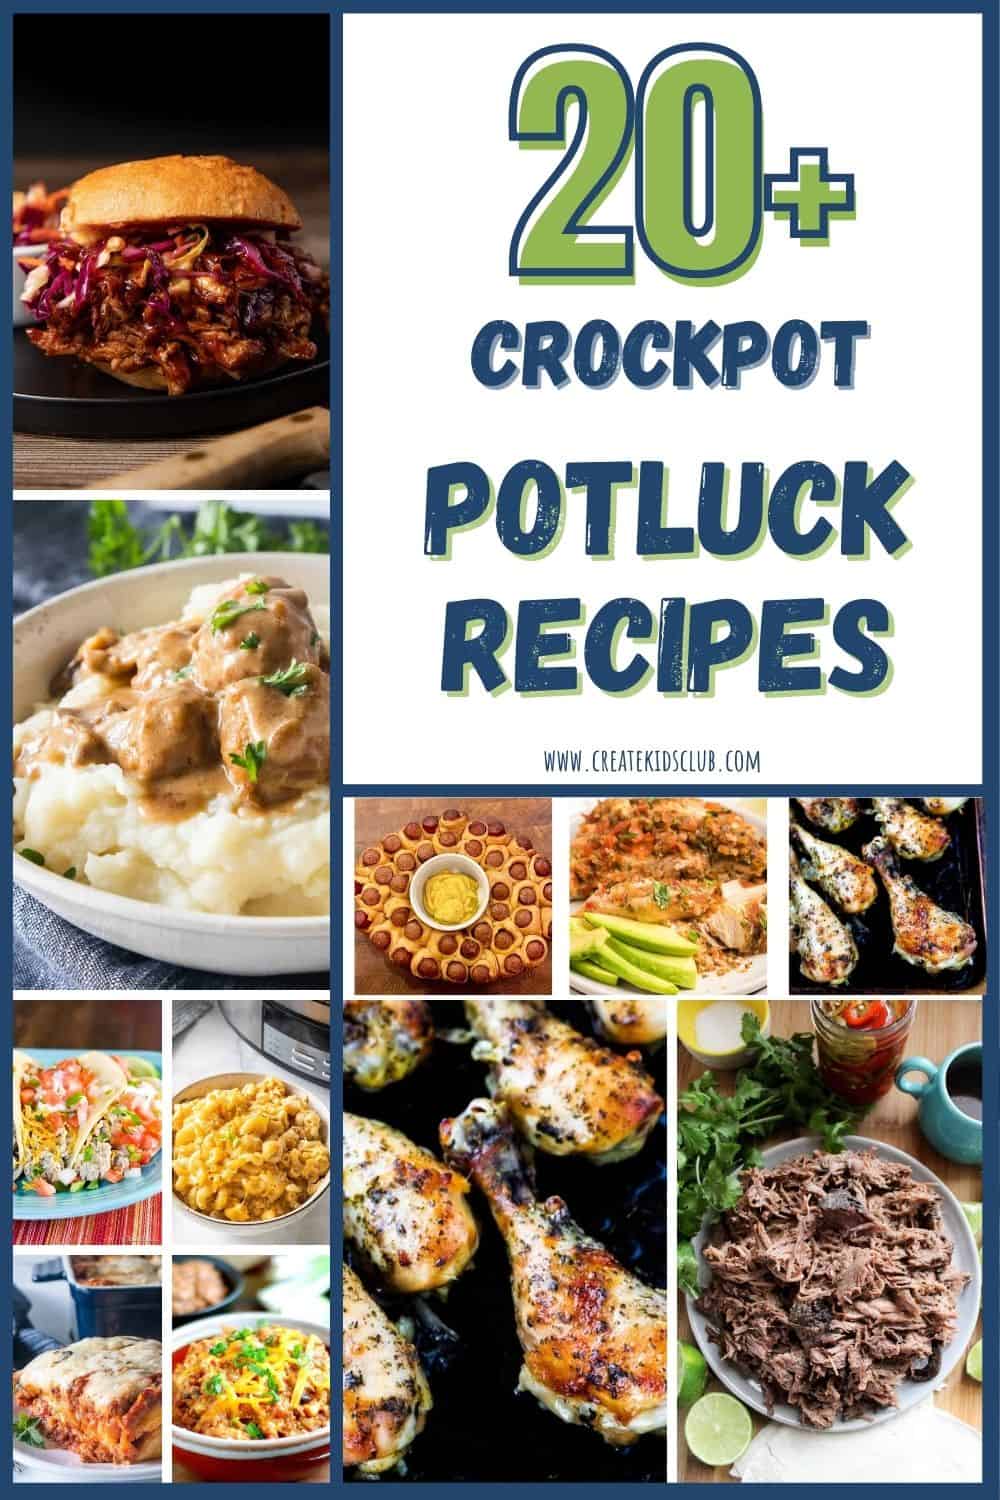 11 pictures of recipes made in a crockpot for potlucks.